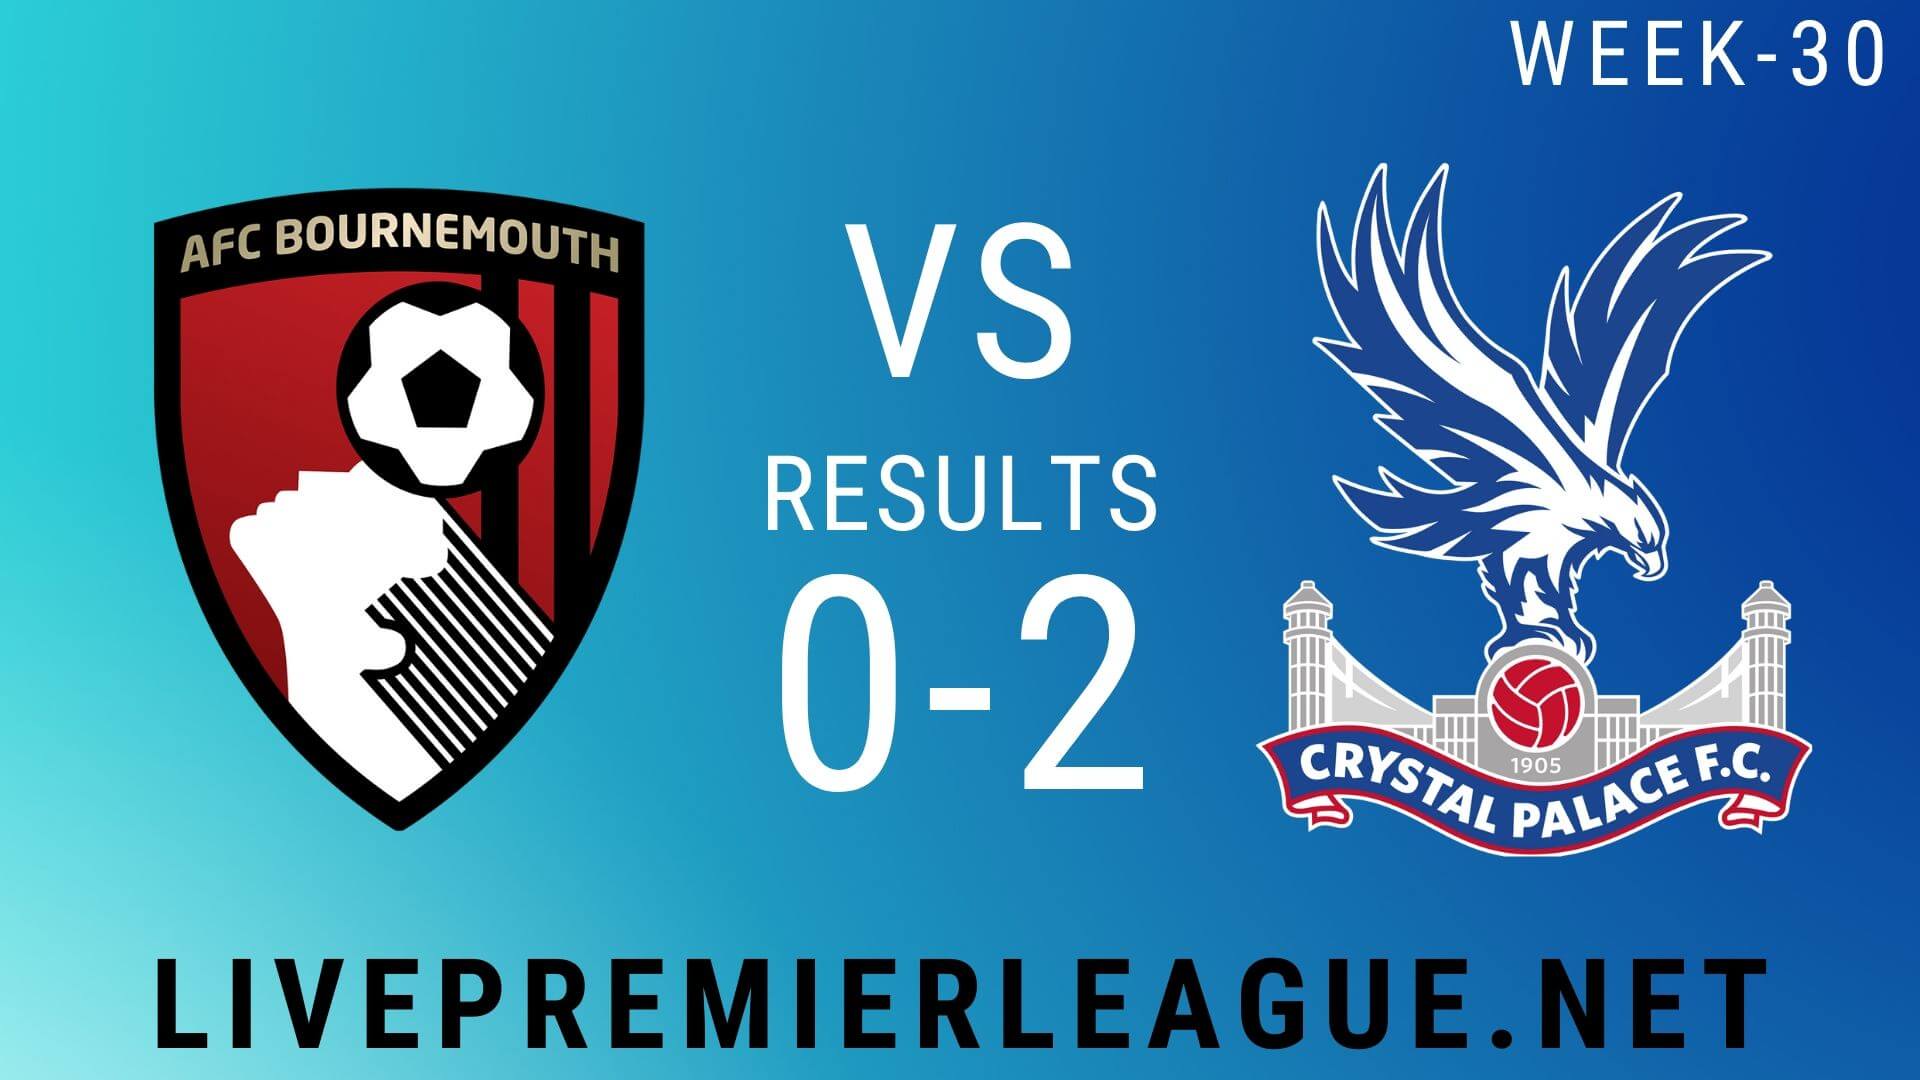 AFC Bournemouth Vs Crystal Palace | Week 30 Result 2020